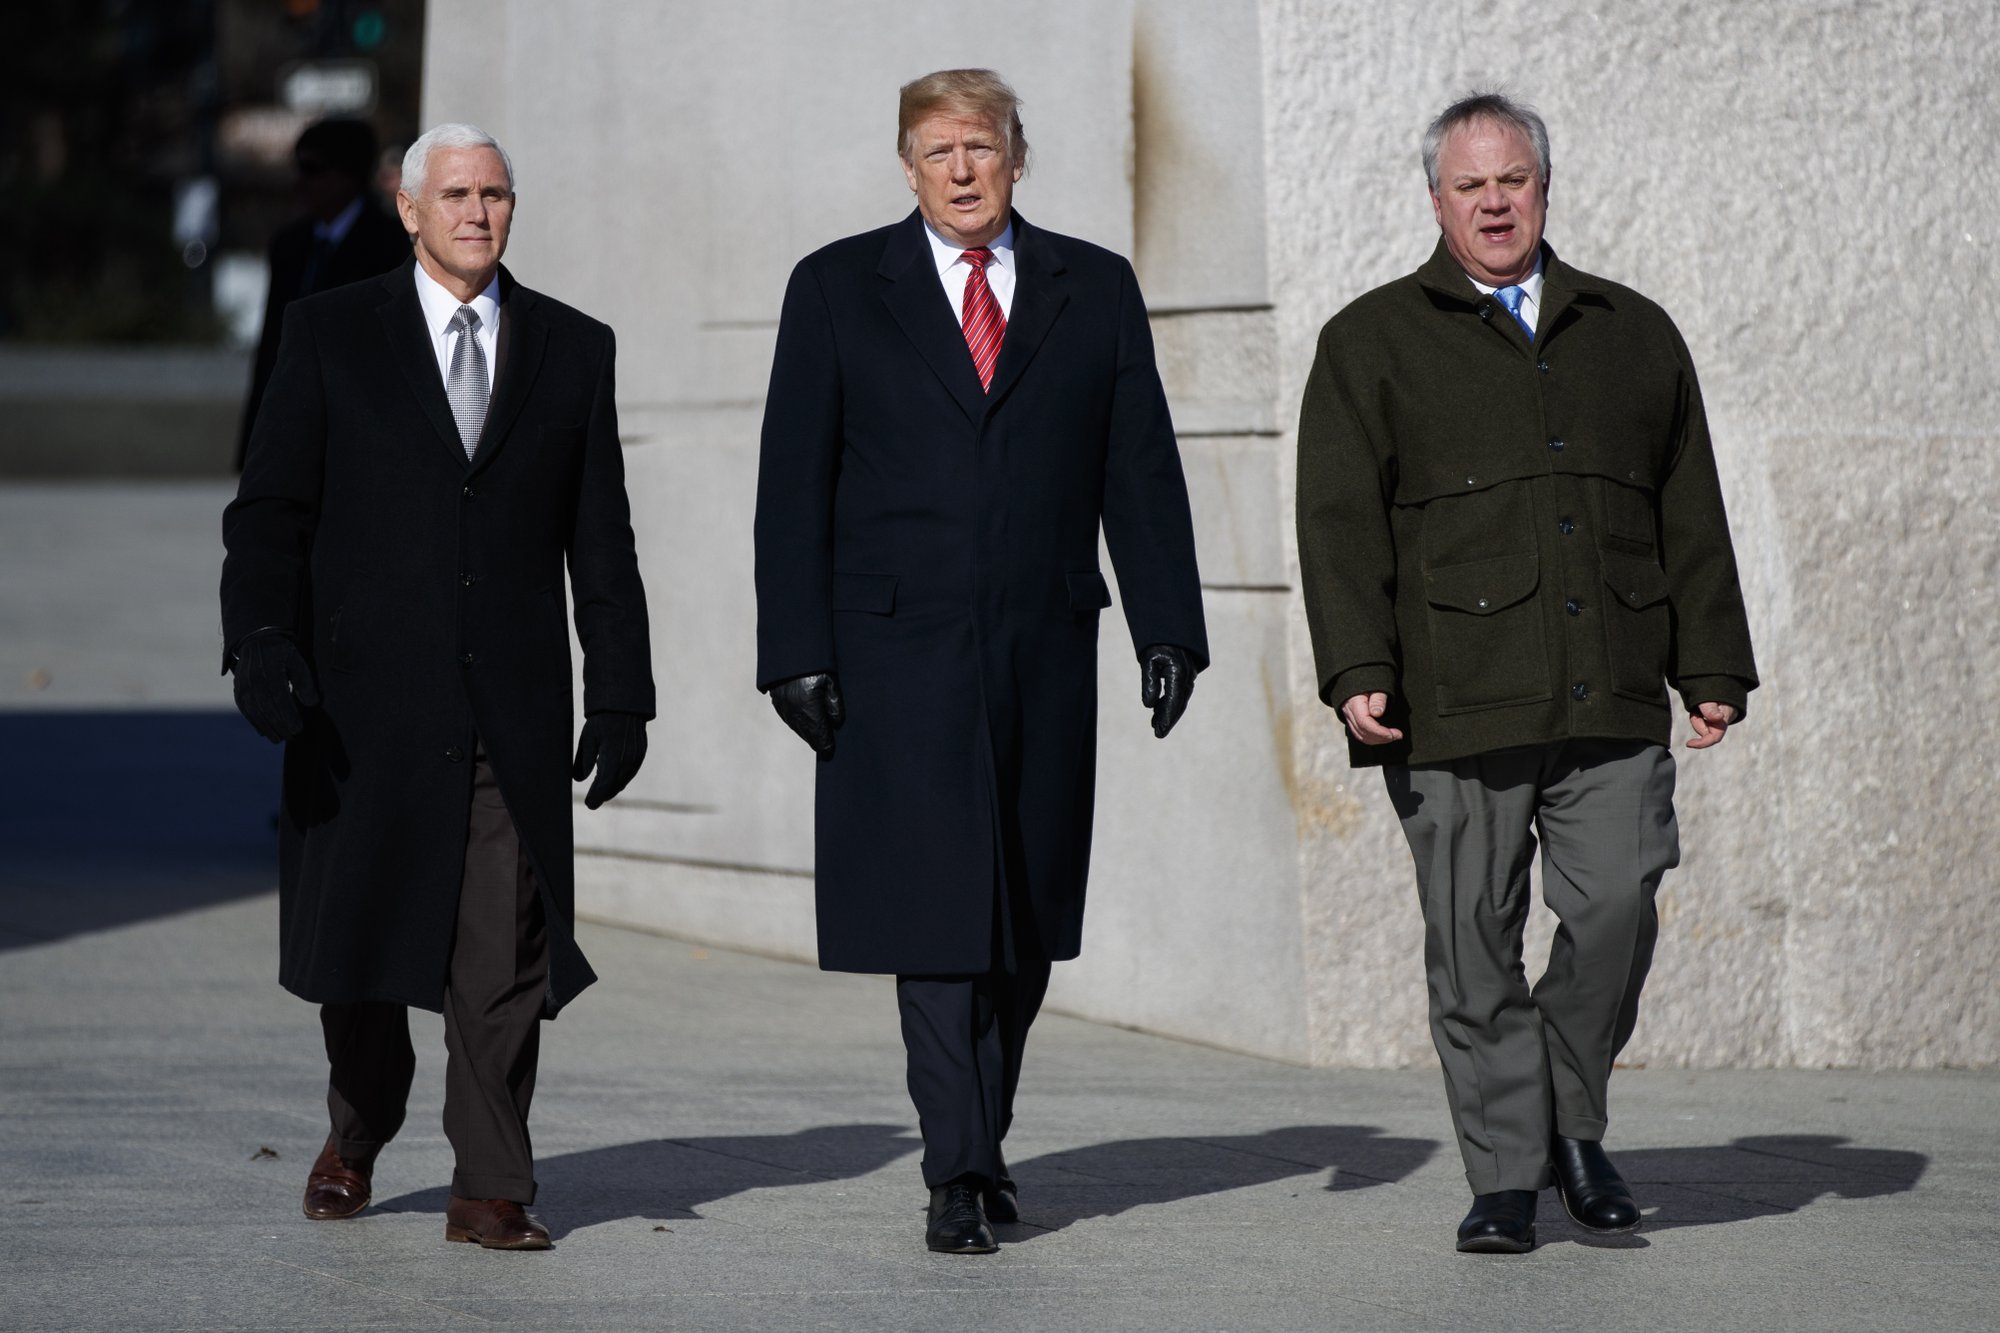 President Donald Trump, center, Vice President Mike Pence, left, escorted by Acting Interior Secretary David Bernhardt, right, visit the Martin Luther King Jr. Memorial, Monday, Jan. 21, 2019, in Washington. (AP Photo/ Evan Vucci)